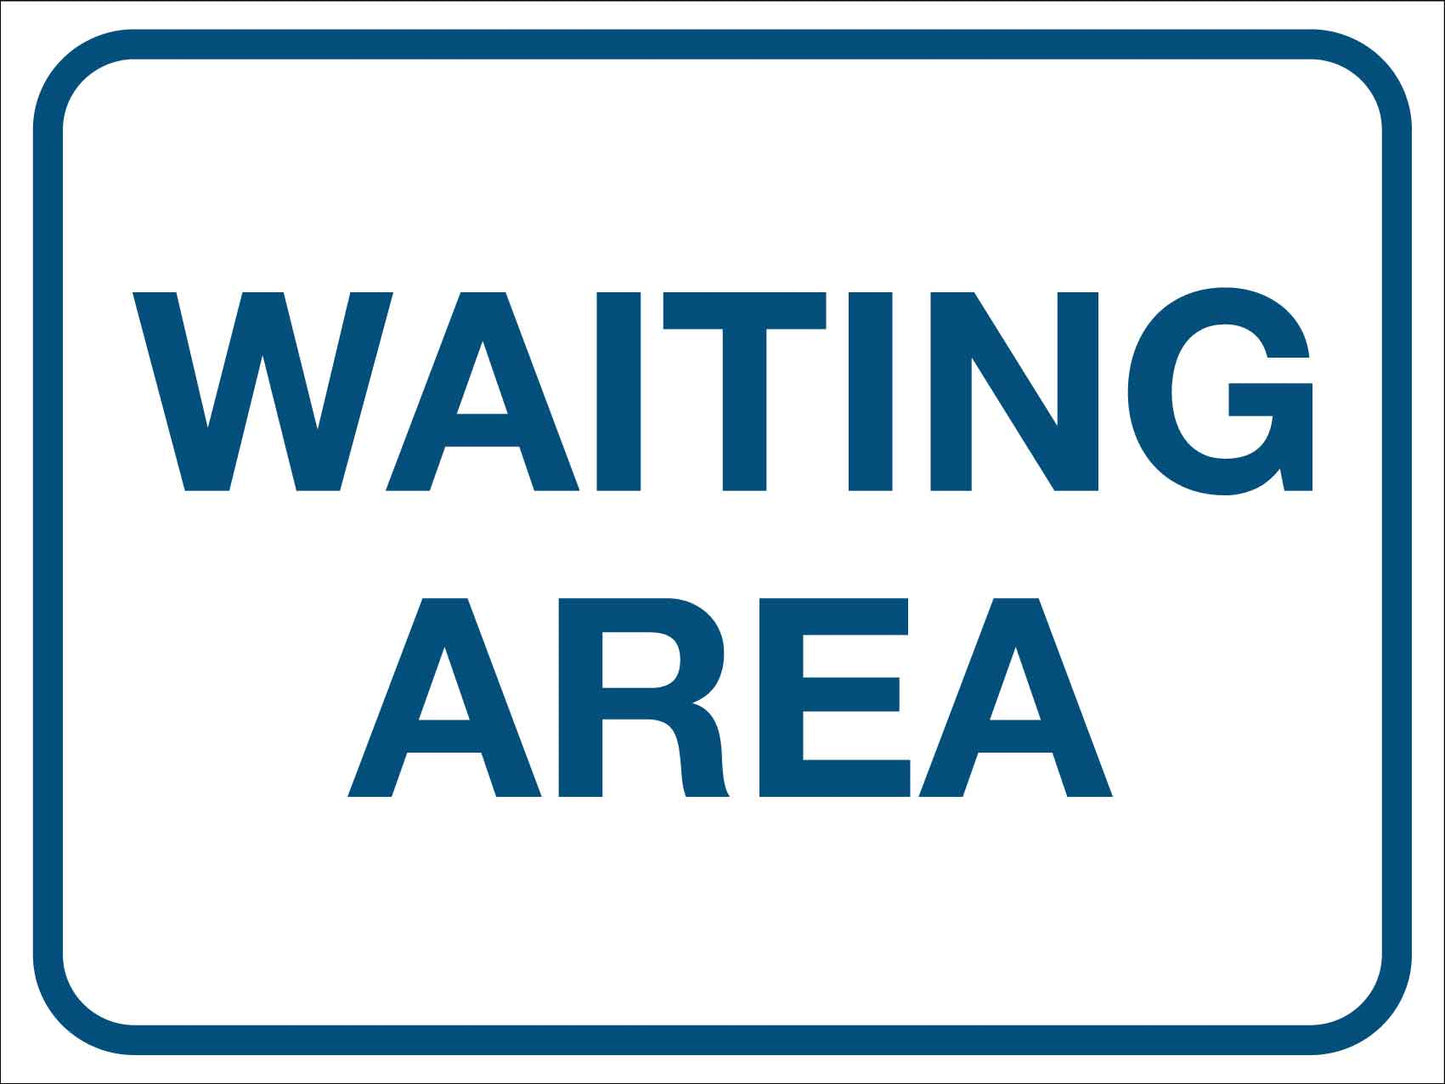 Waiting Area Sign